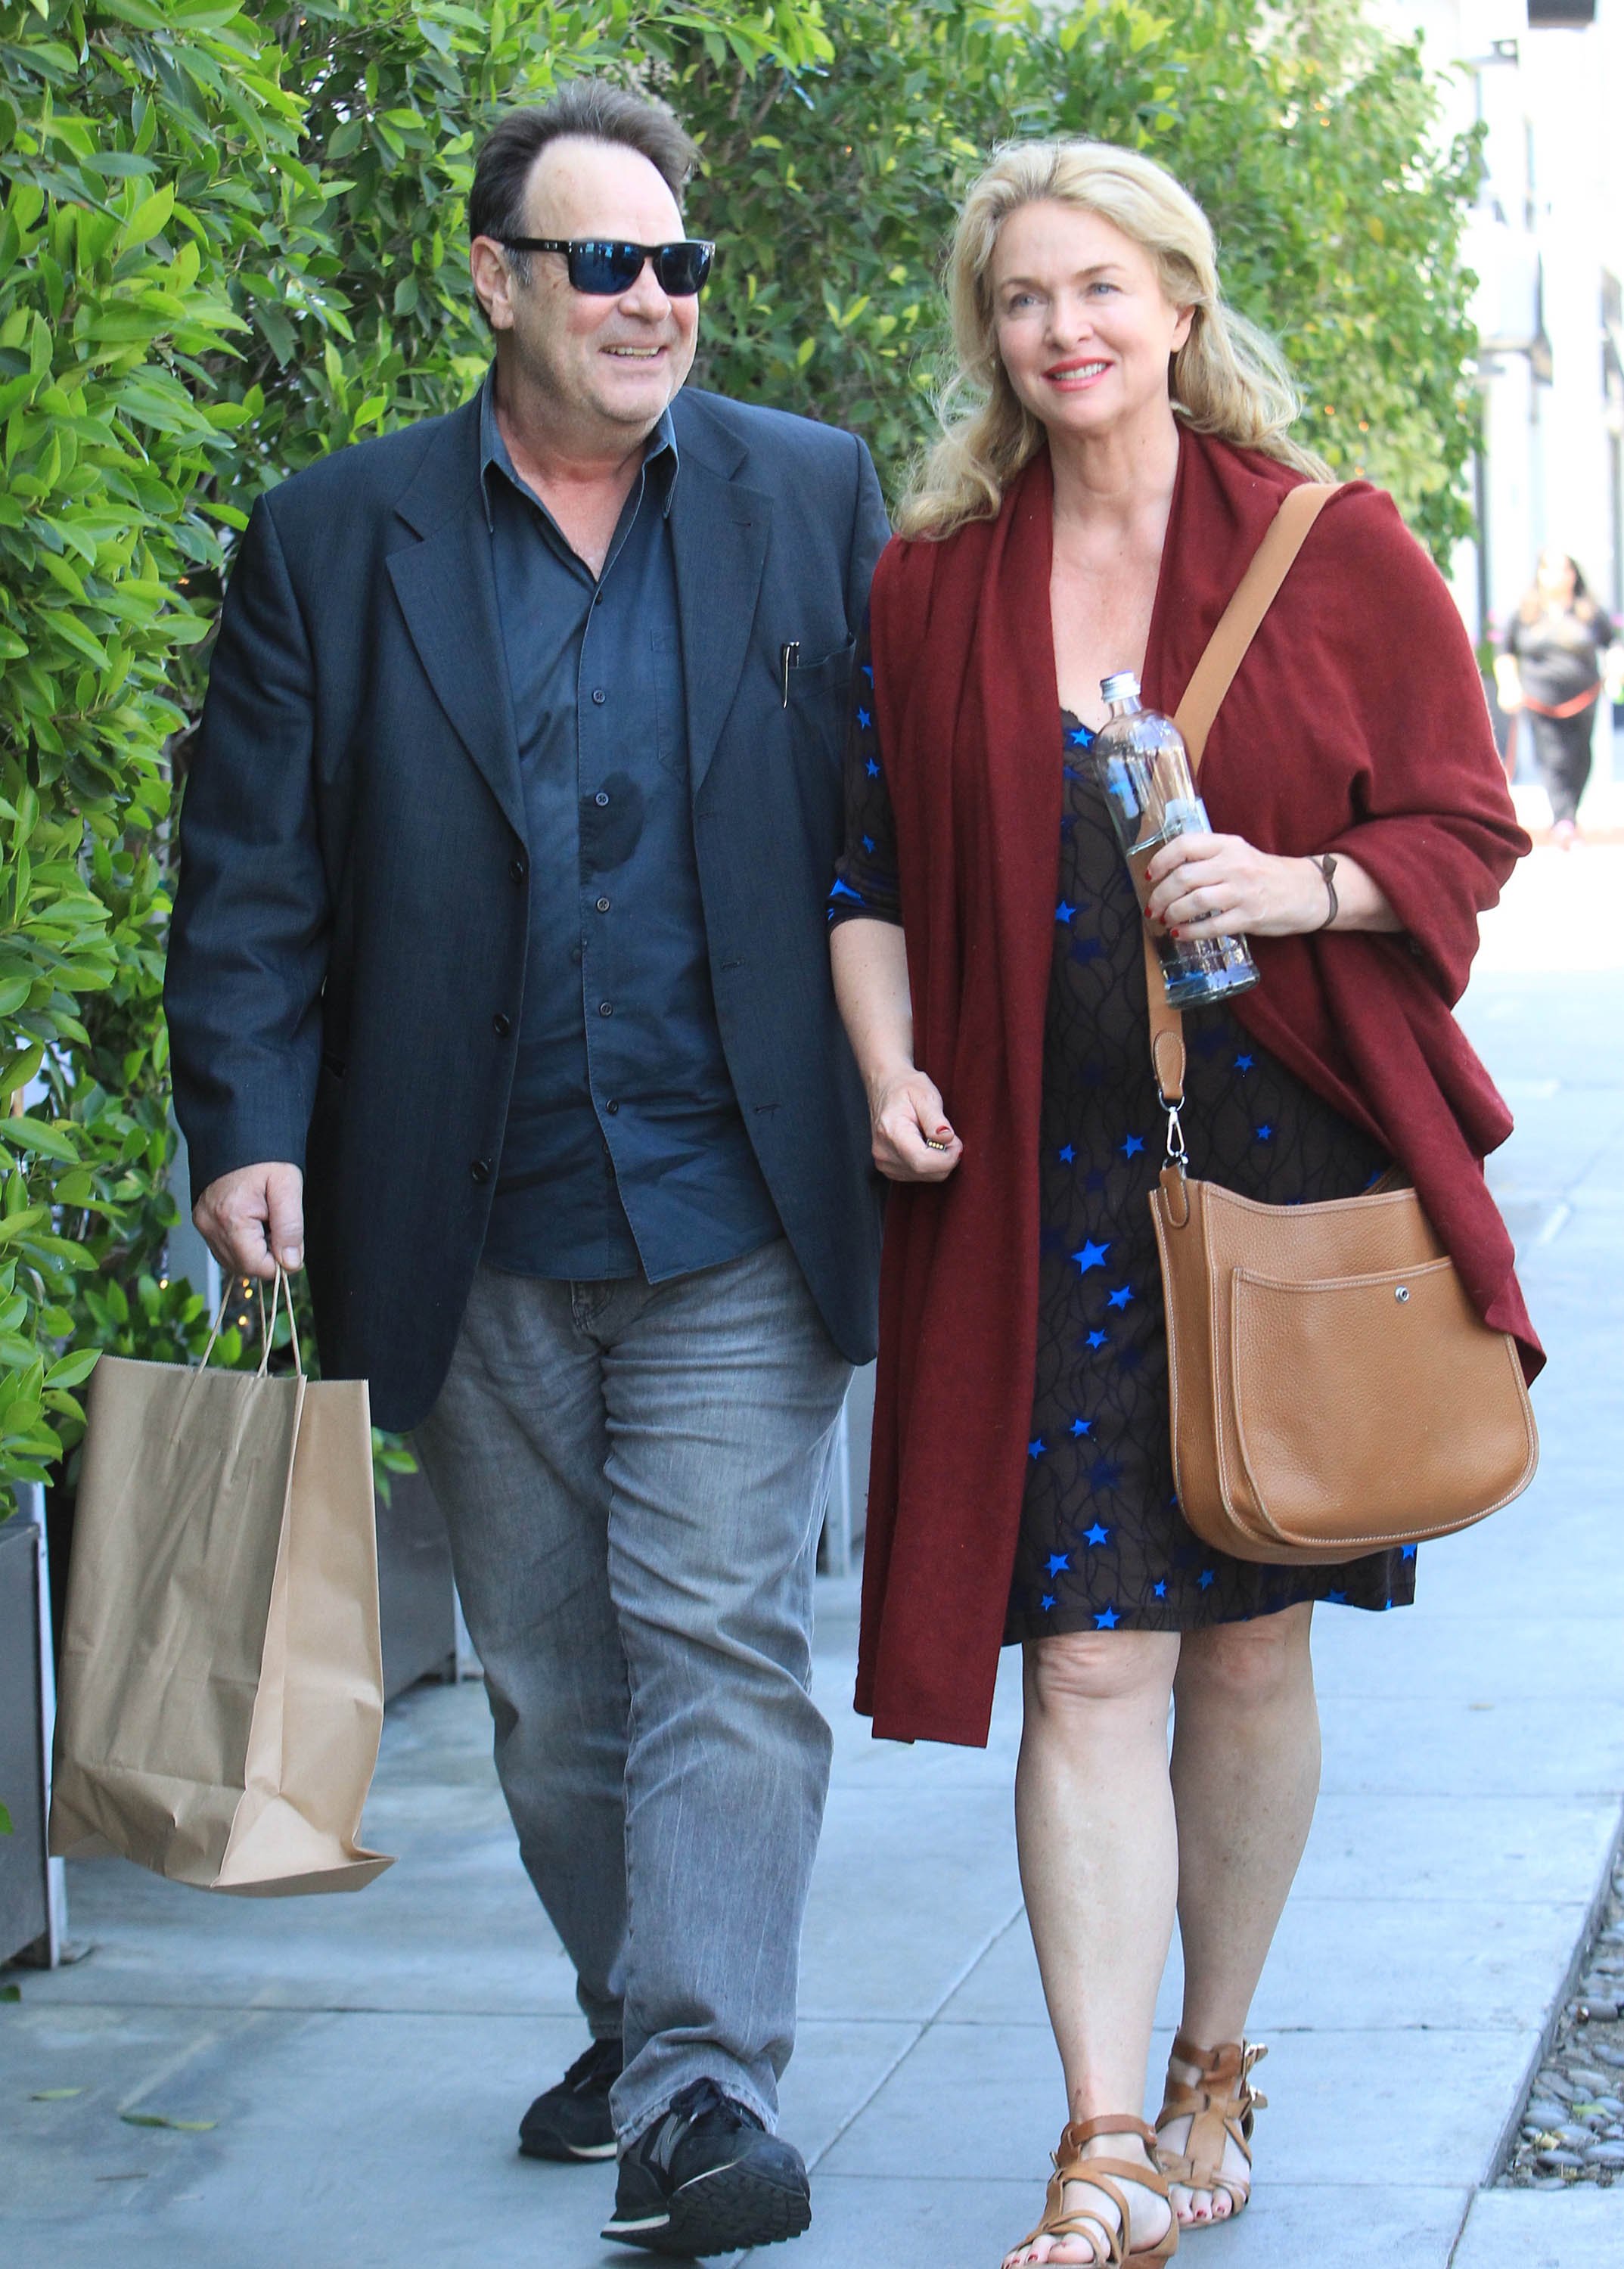 Dan Aykroyd and Donna Dixon are seen on April 26, 2018 in Los Angeles, CA. | Source: Getty Images